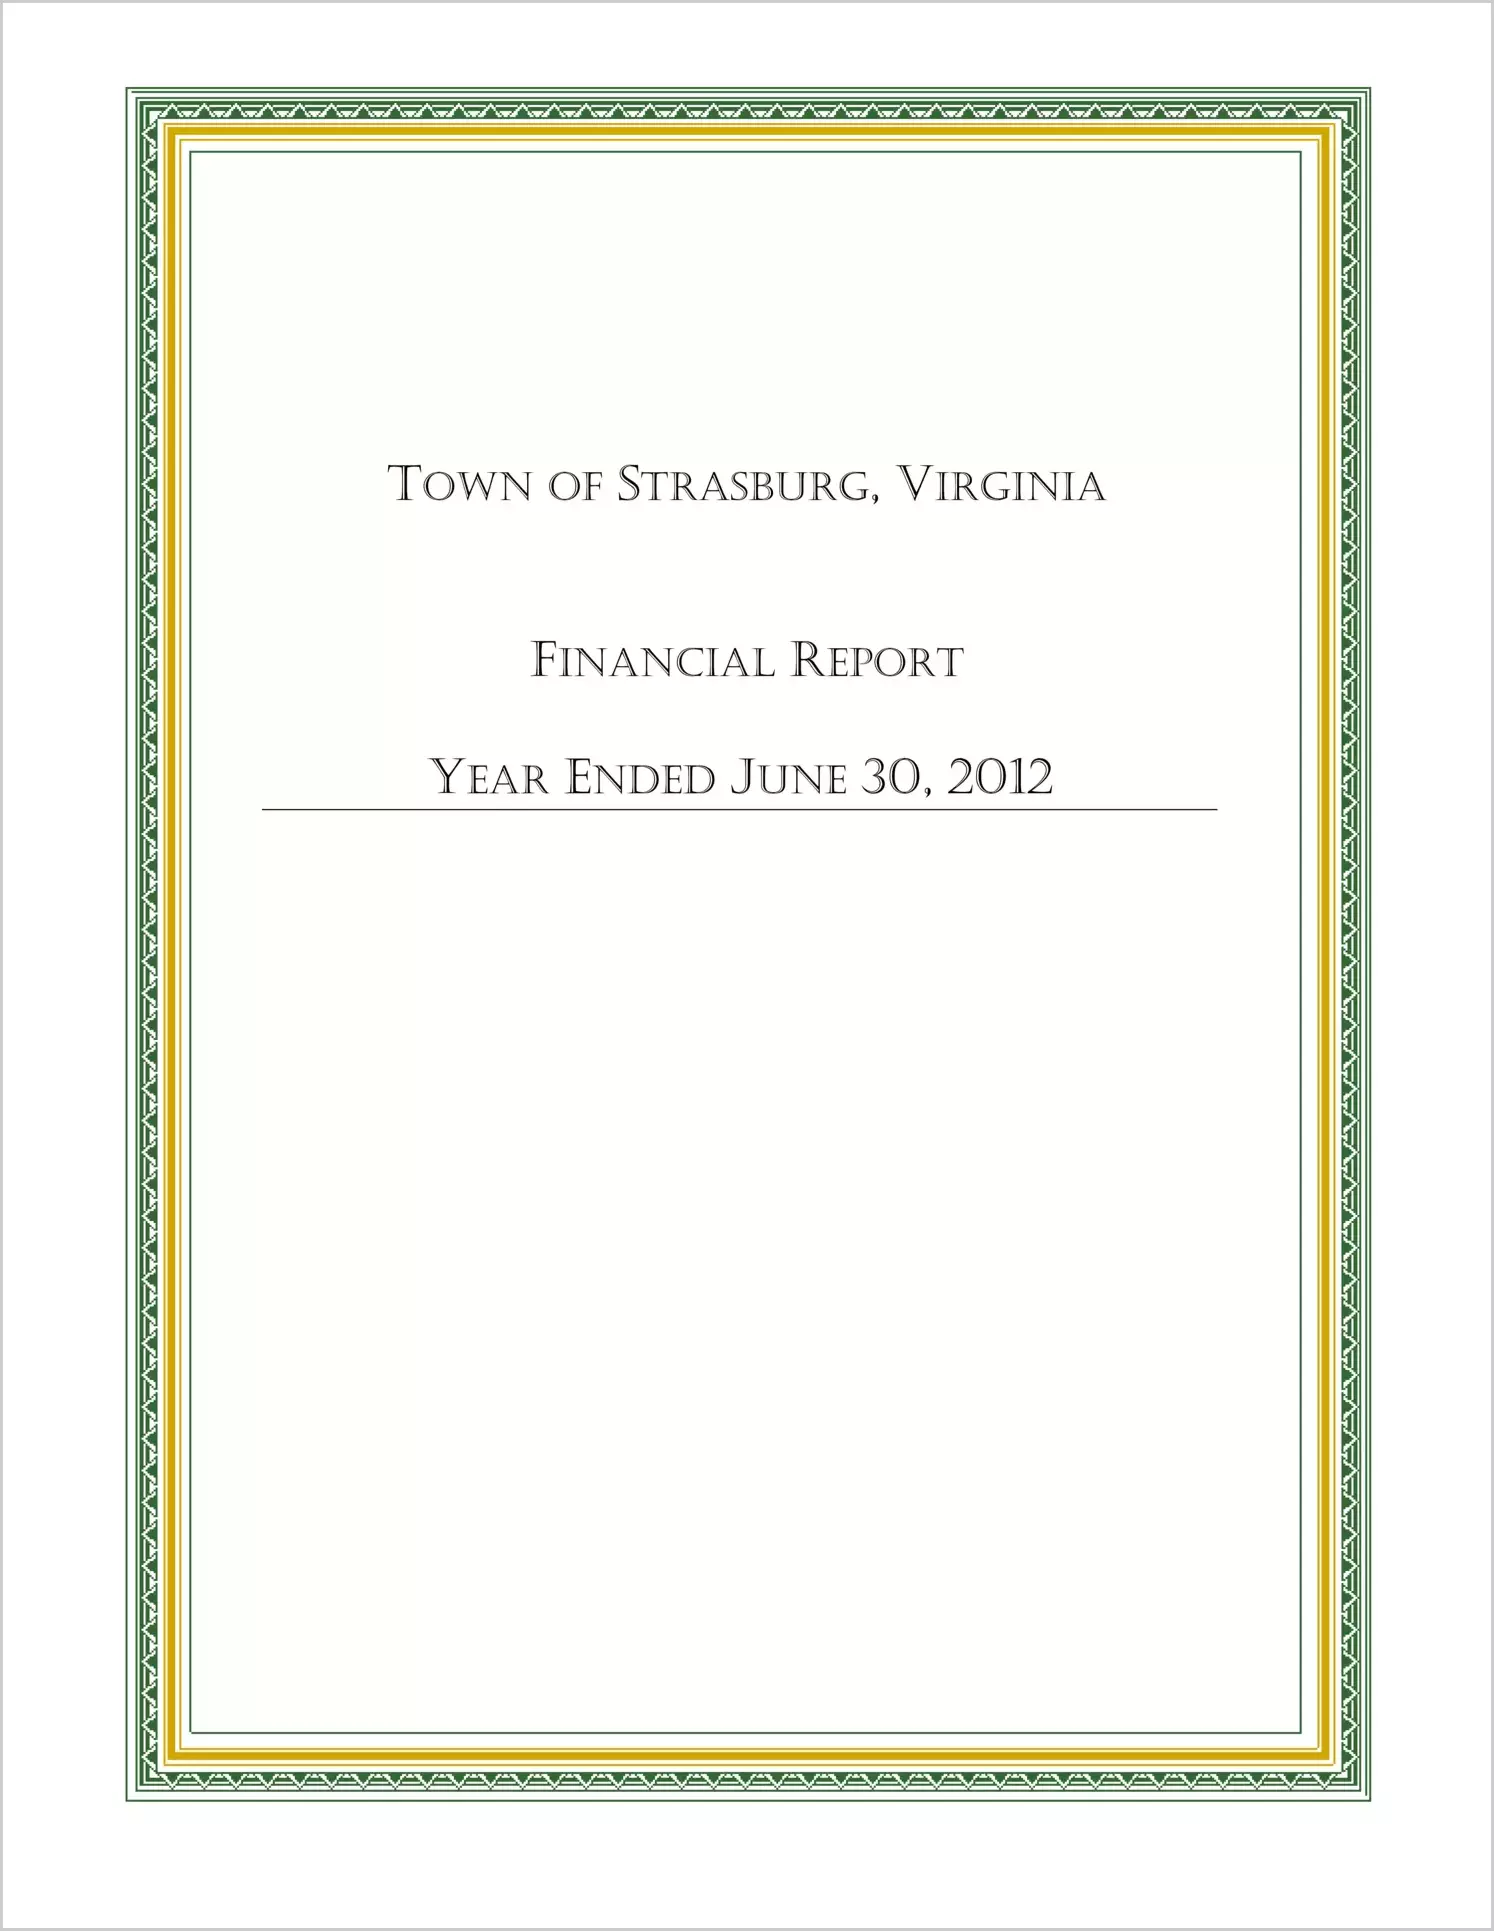 2012 Annual Financial Report for Town of Strasburg